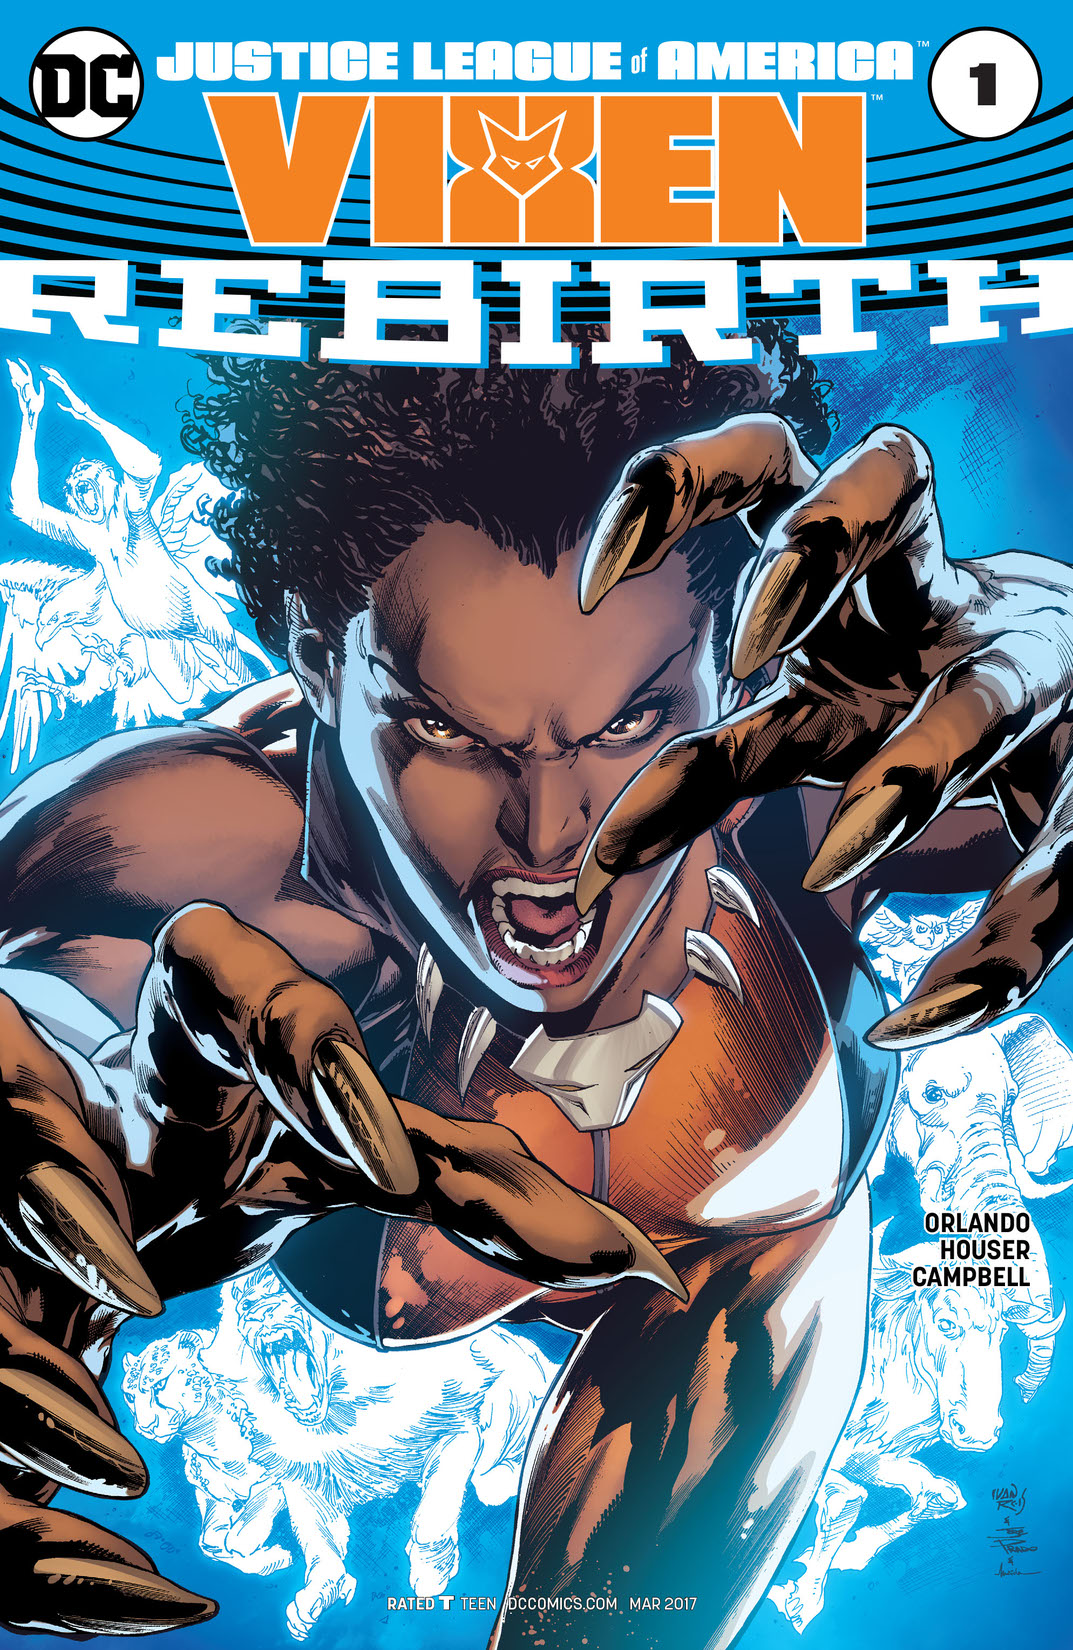 Justice League of America: Vixen Rebirth (2017-) #1 preview images